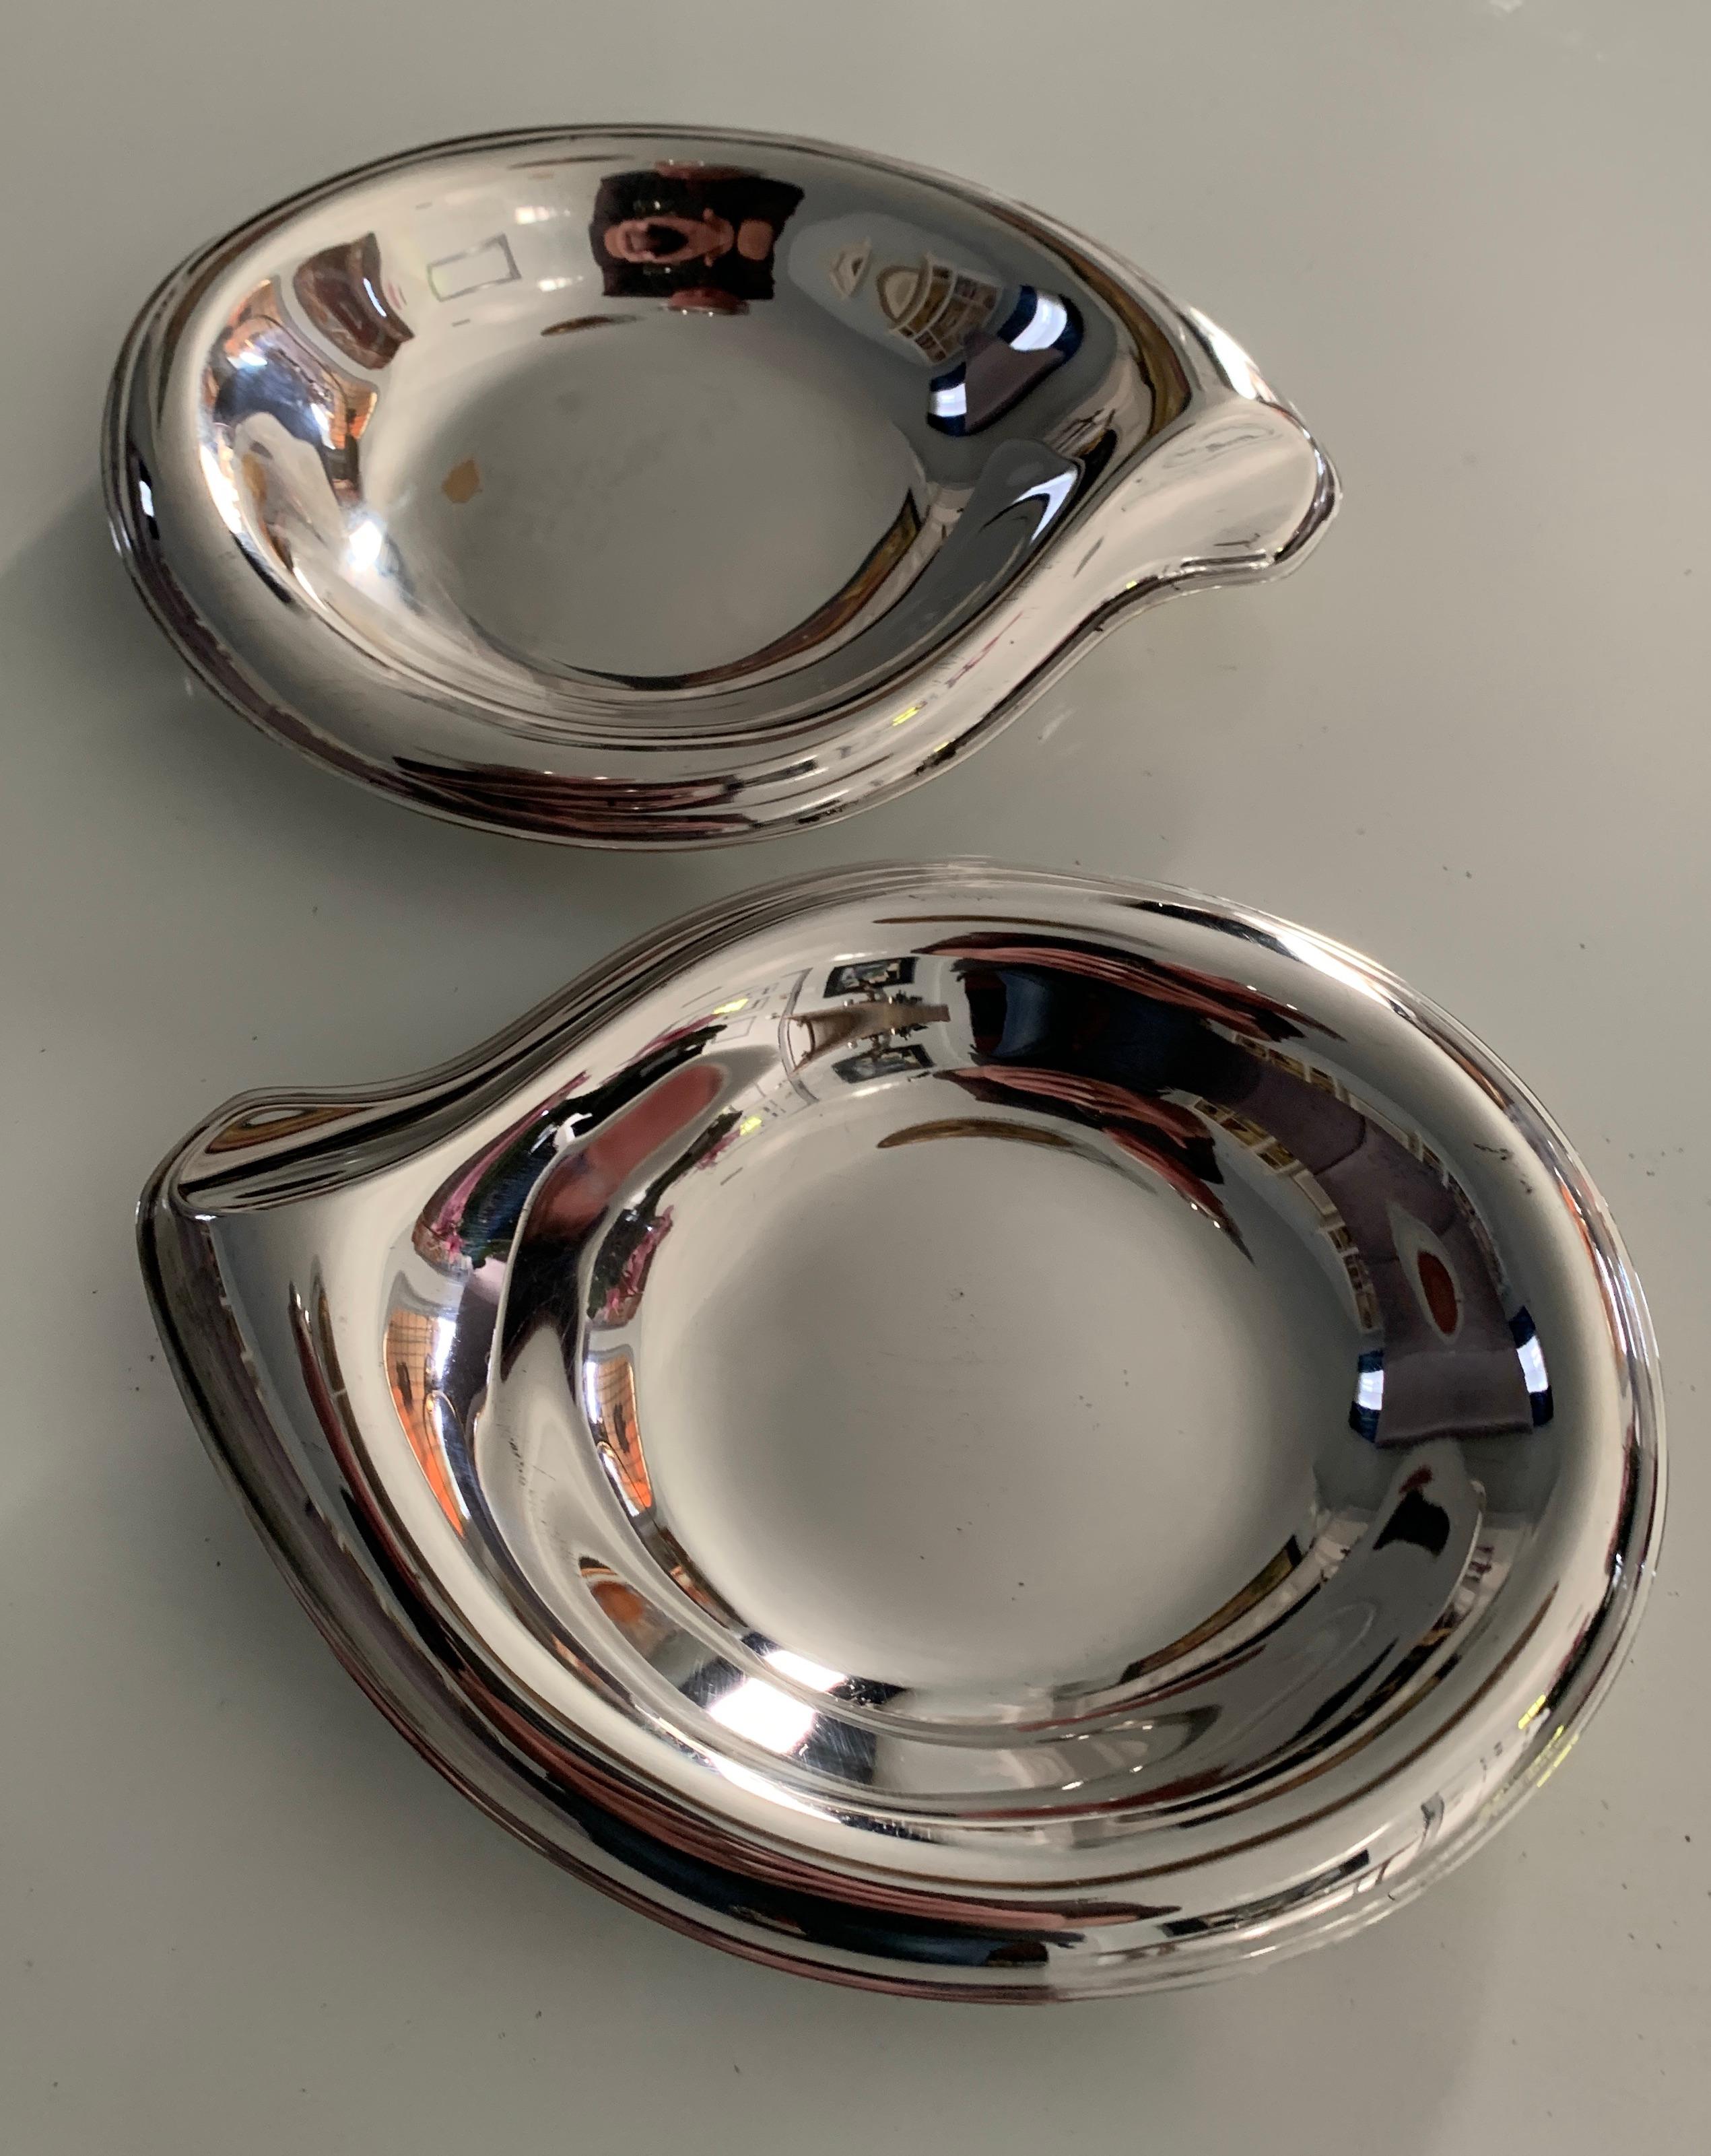 Pair of delightfully curved sliver plate dishes by Rogers, however the look is reminiscent of Elsa Peretti - organically curvaceous. Originally designed for Bon Bons, the pair well suited for the bar, for hors d'oeuvres, or for his and his soap